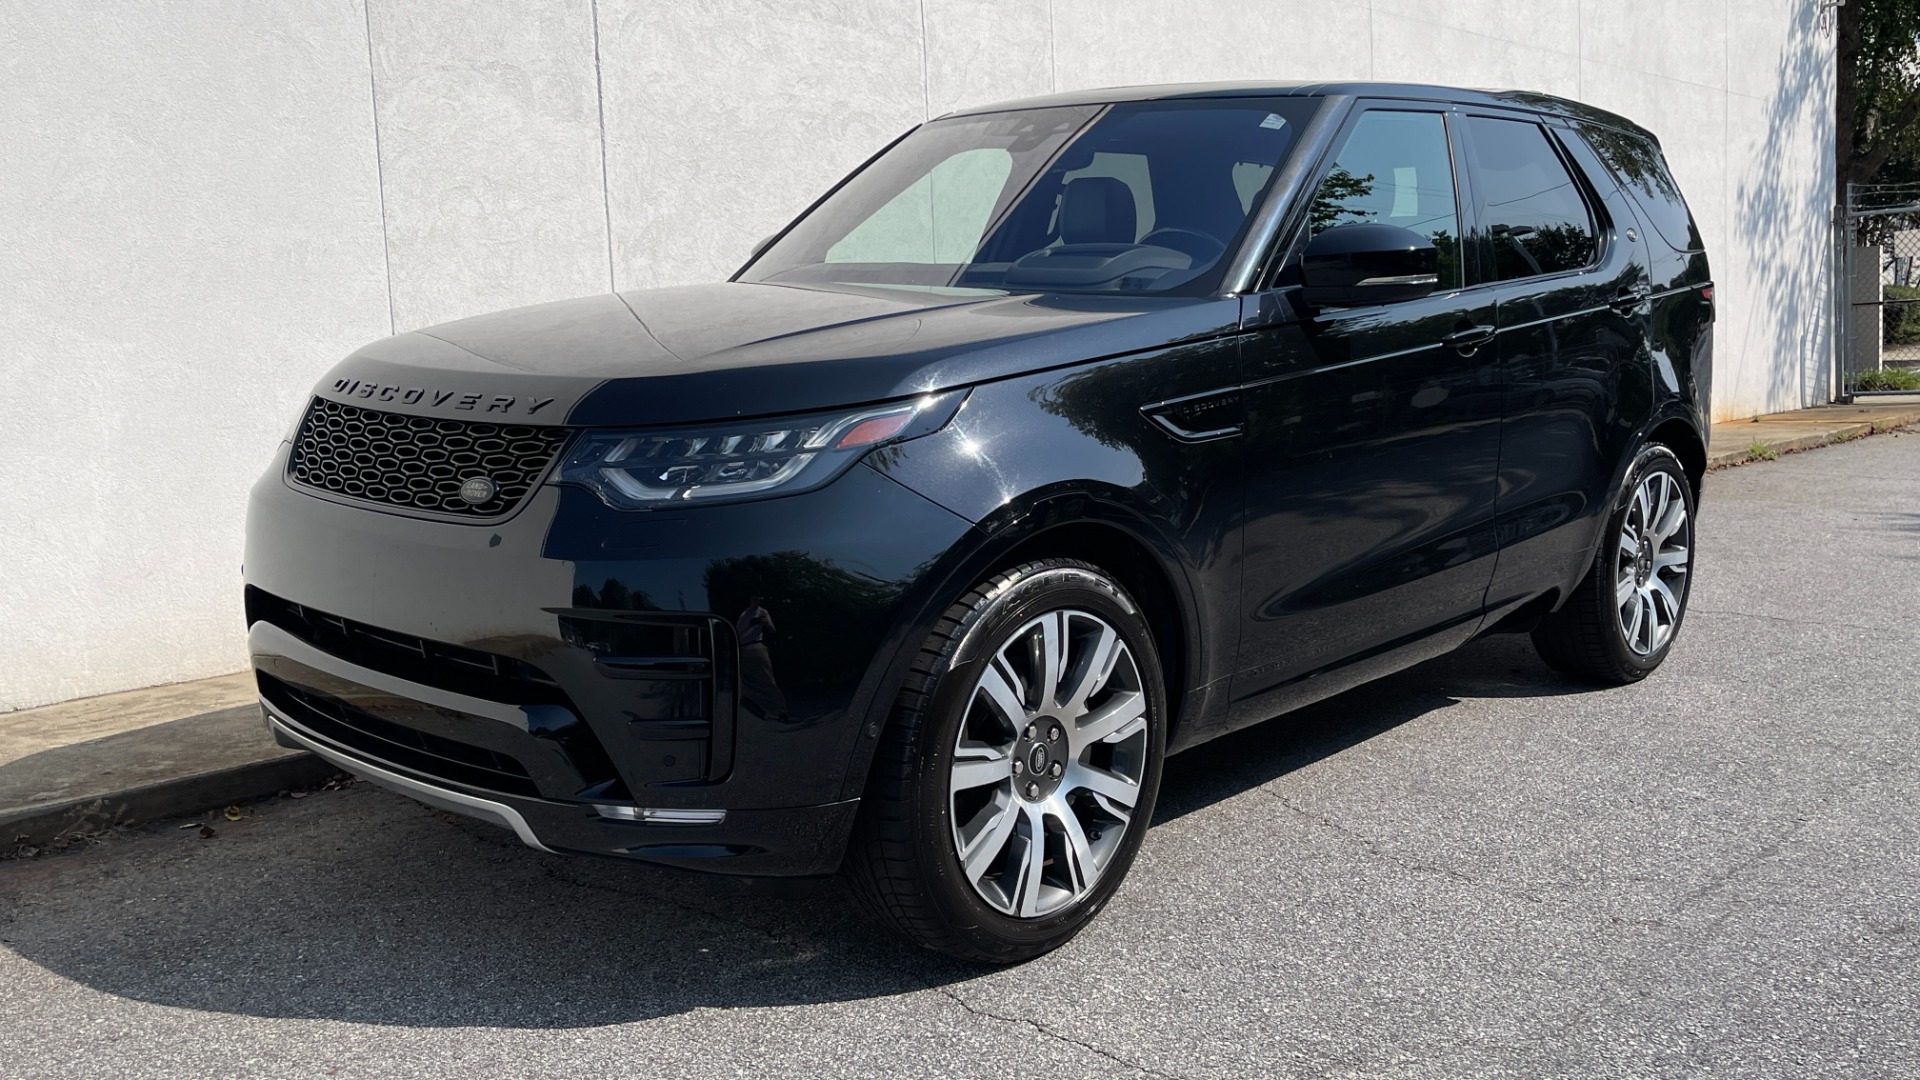 Used 2019 Land Rover Discovery HSE / SEVEN SEAT / DYNAMIC PACKAGE / 21IN WHEELS / REMOTE SEAT PACKAGE for sale $36,500 at Formula Imports in Charlotte NC 28227 3